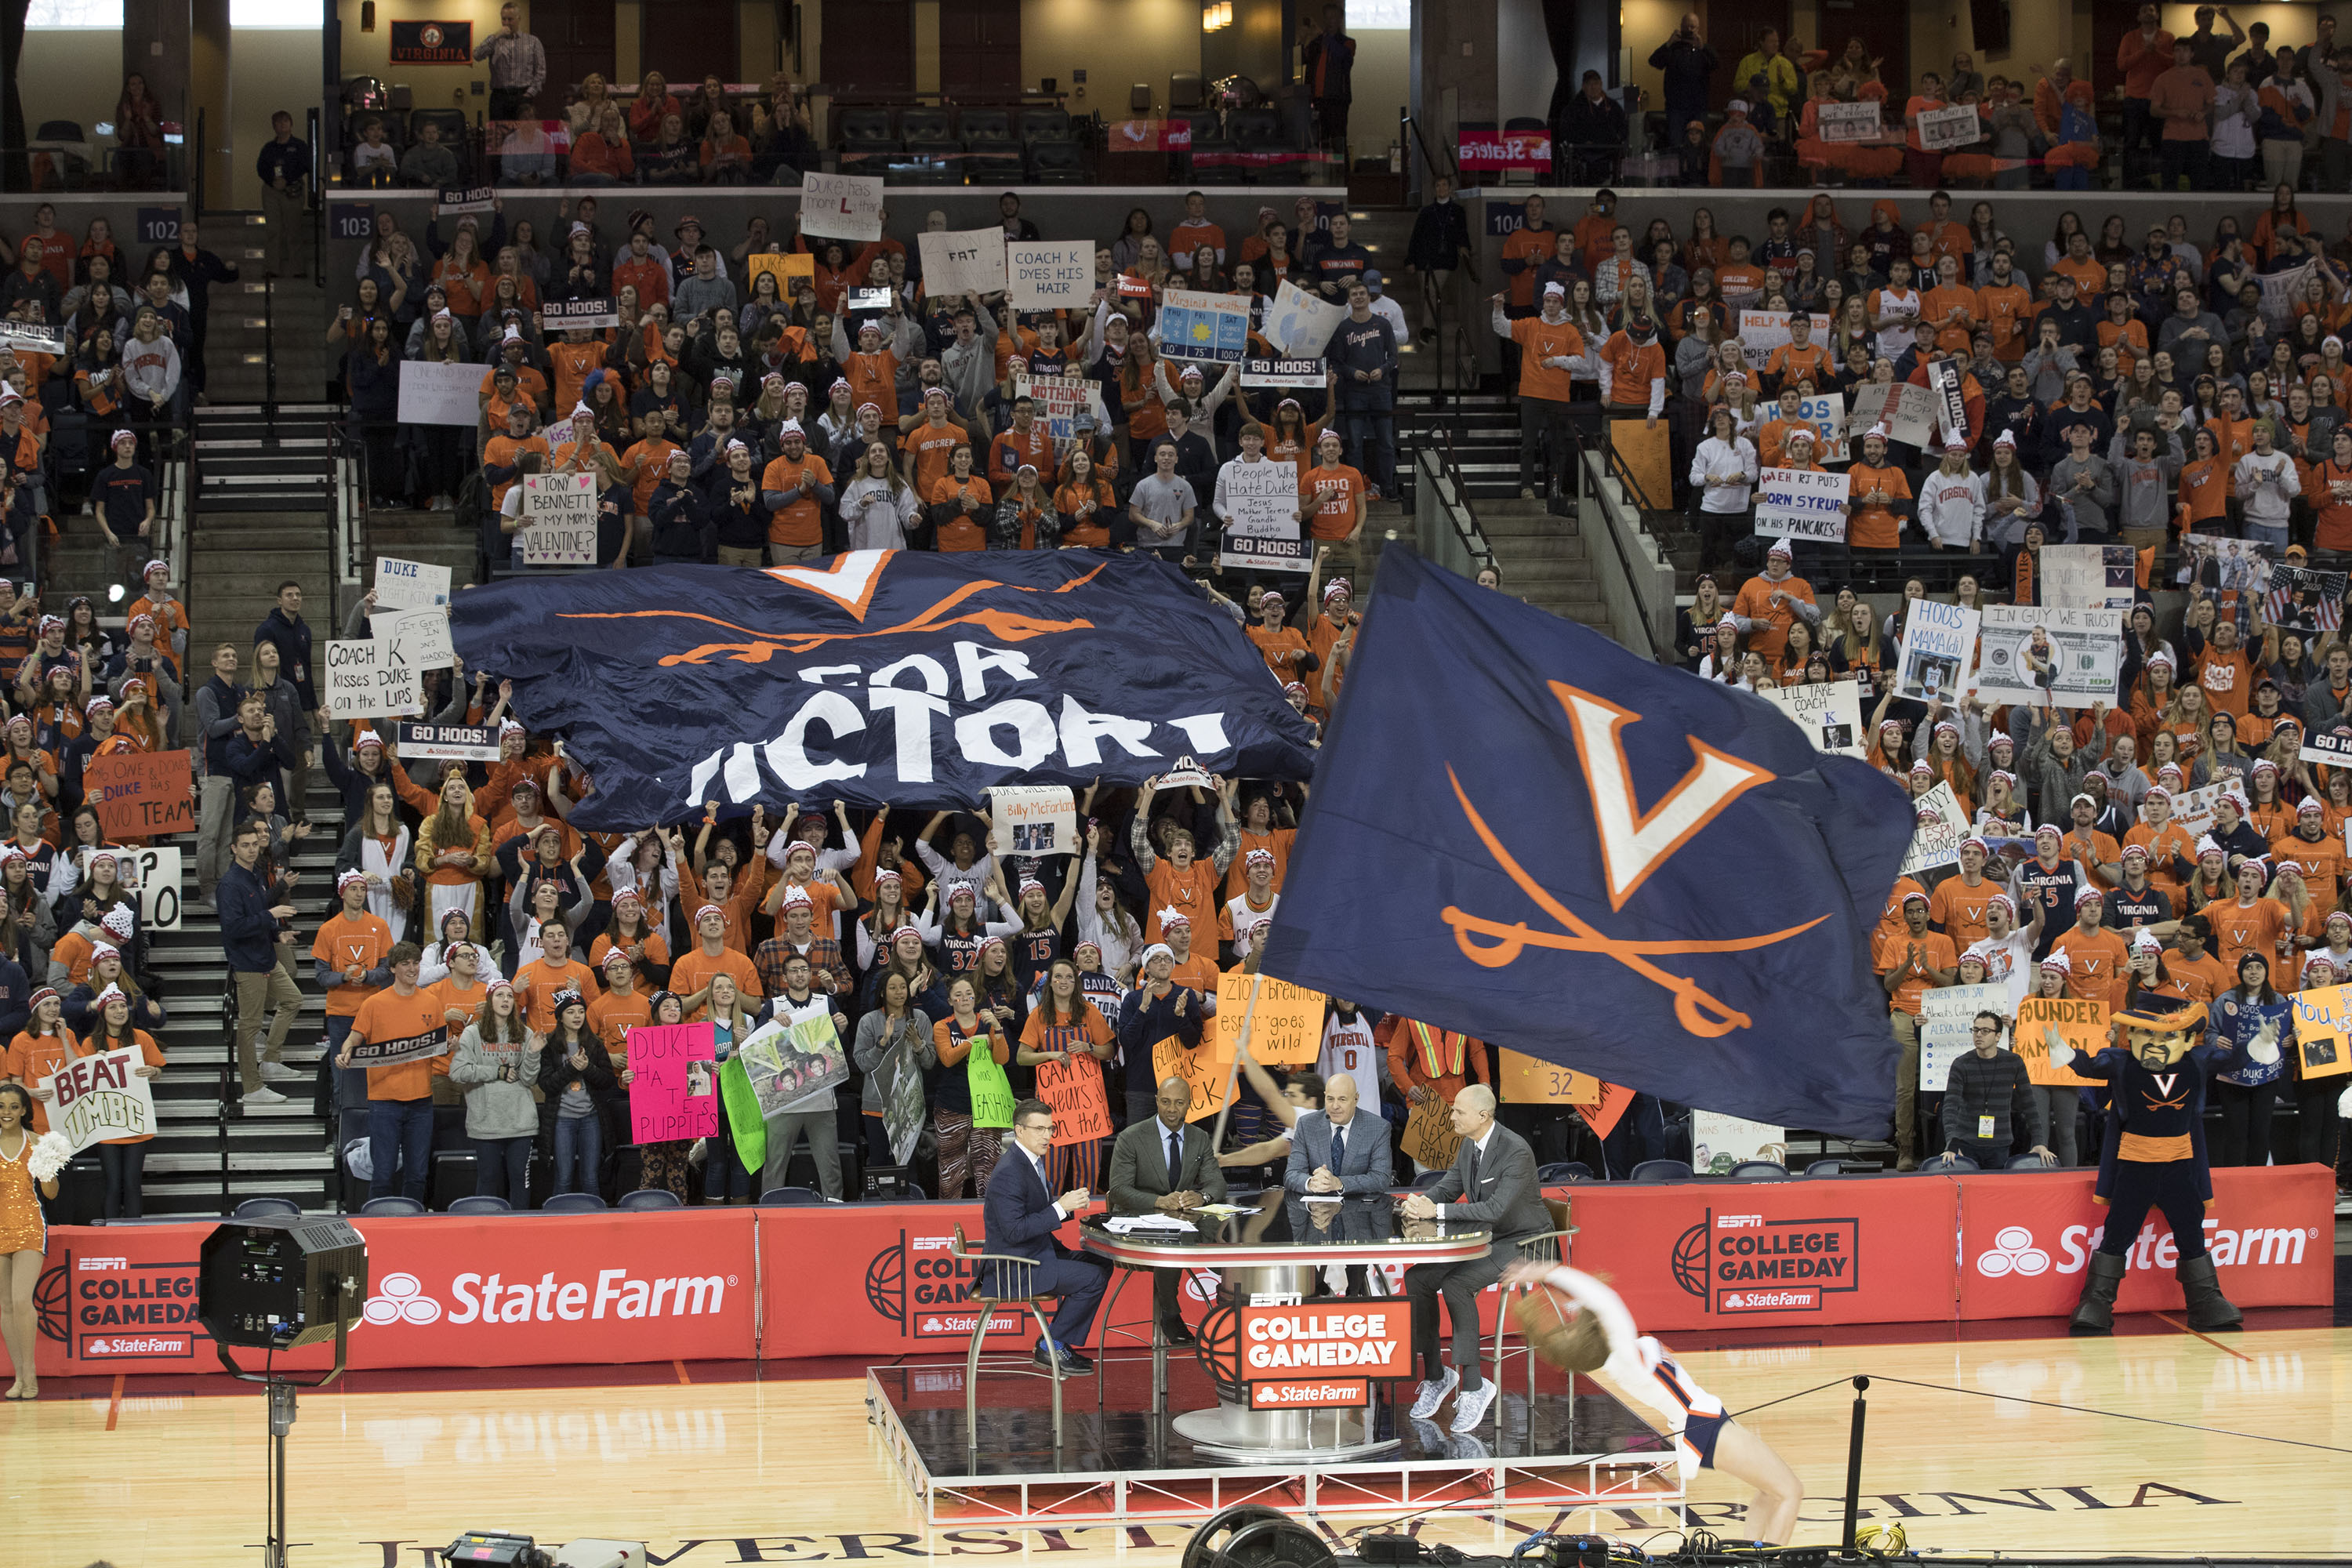 UVA crowd going crazy as ESPN gameday films before basketball game